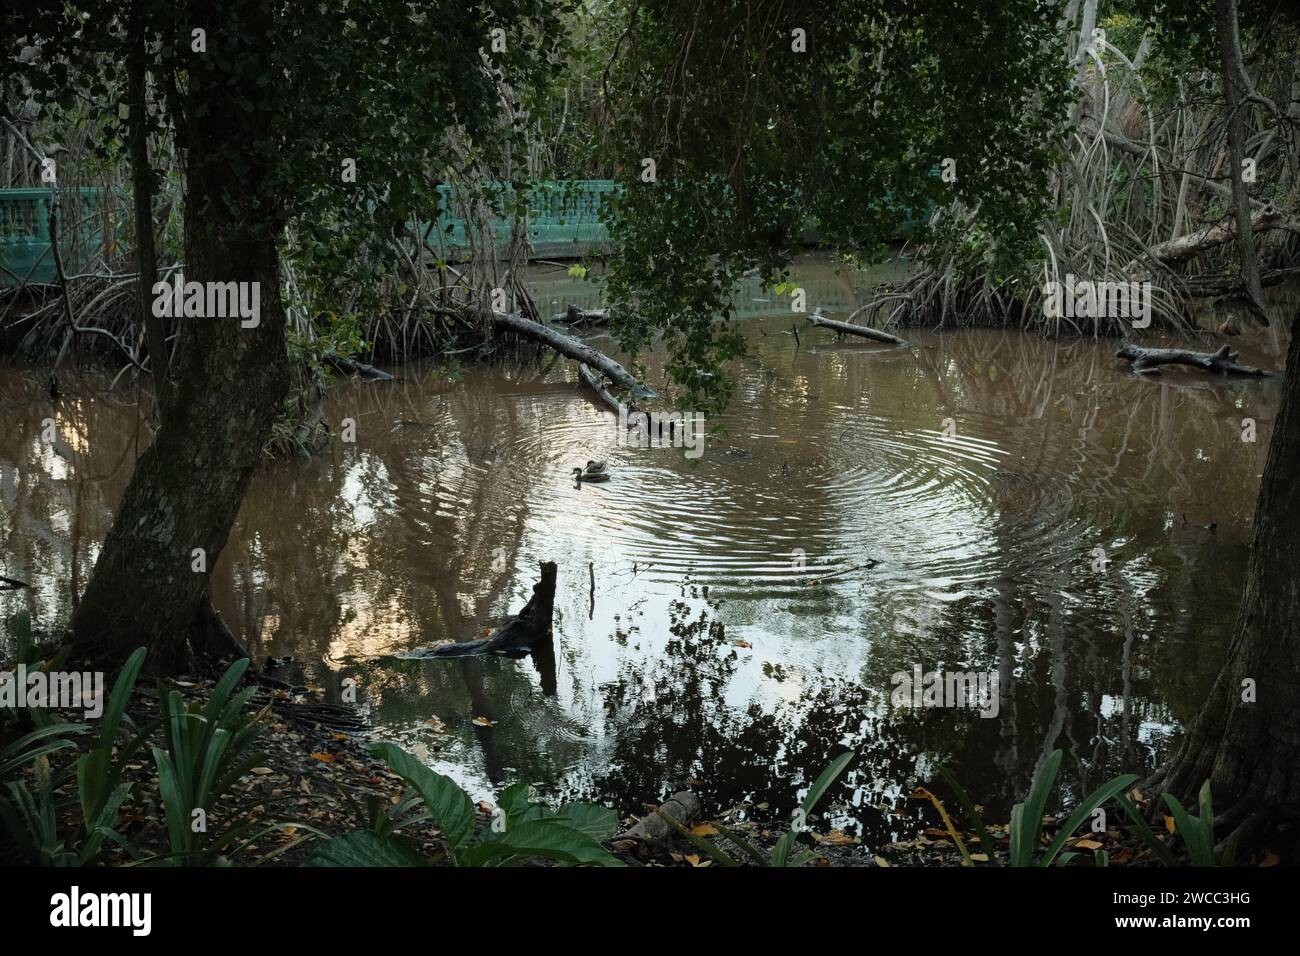 Ducks in a swamp Stock Photo